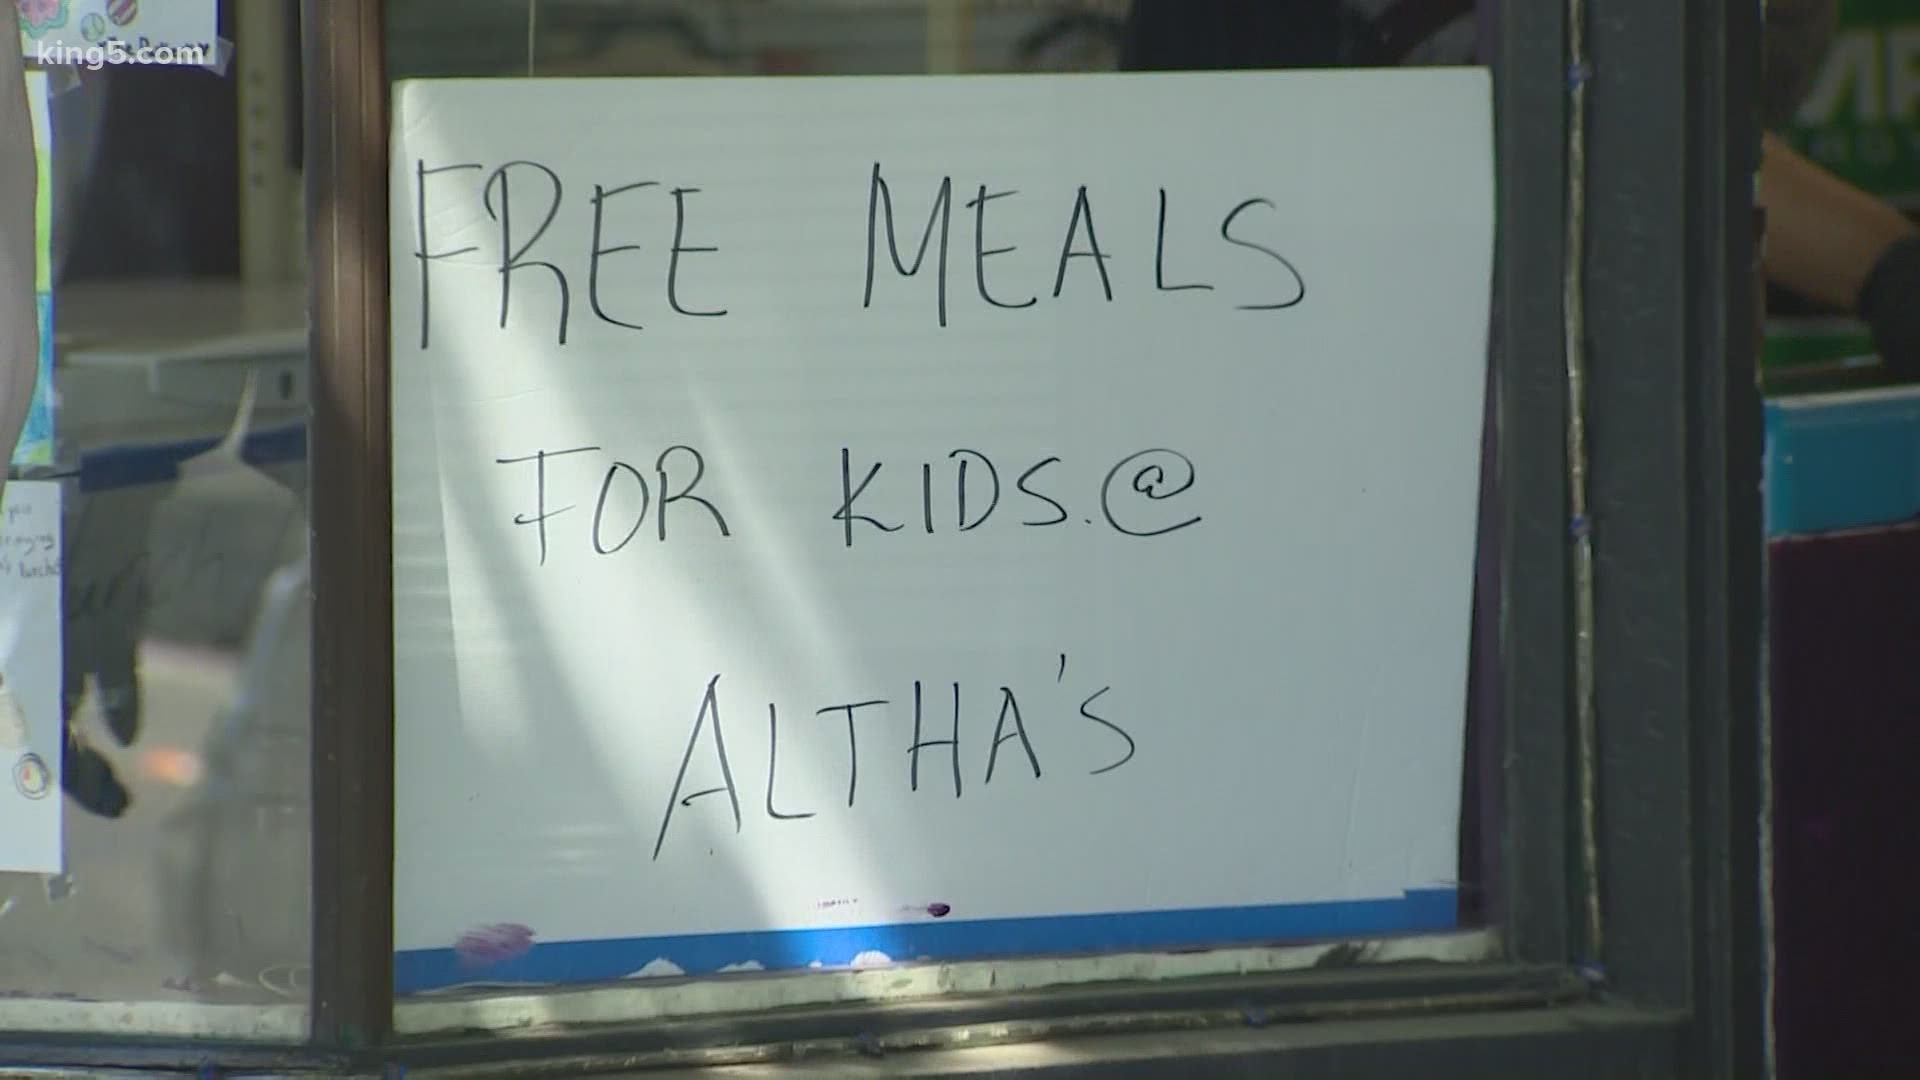 A lunch shortage in the Kent School District has been remedied after kids couldn't receive the packaged meals.